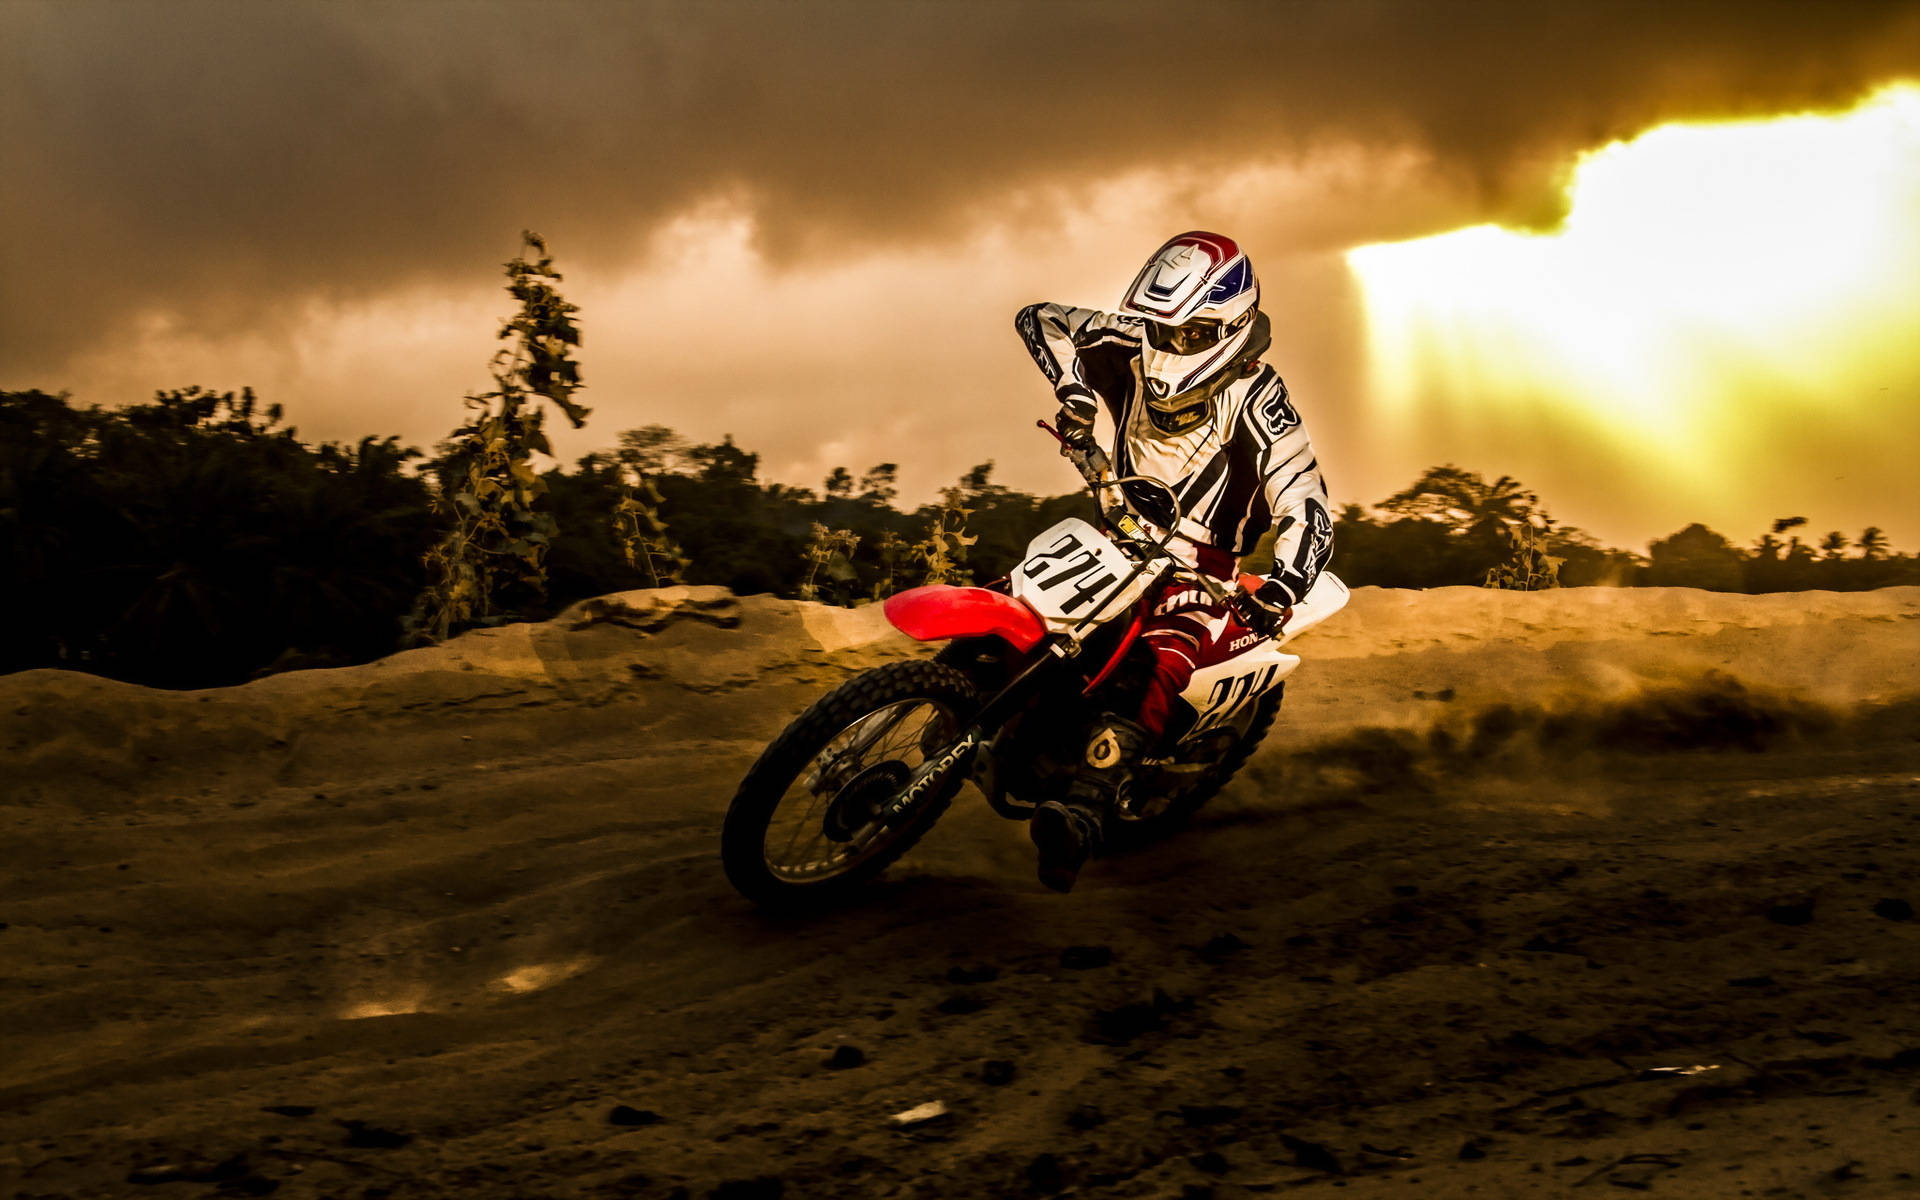 Cloudy Dirtbike Riding Background